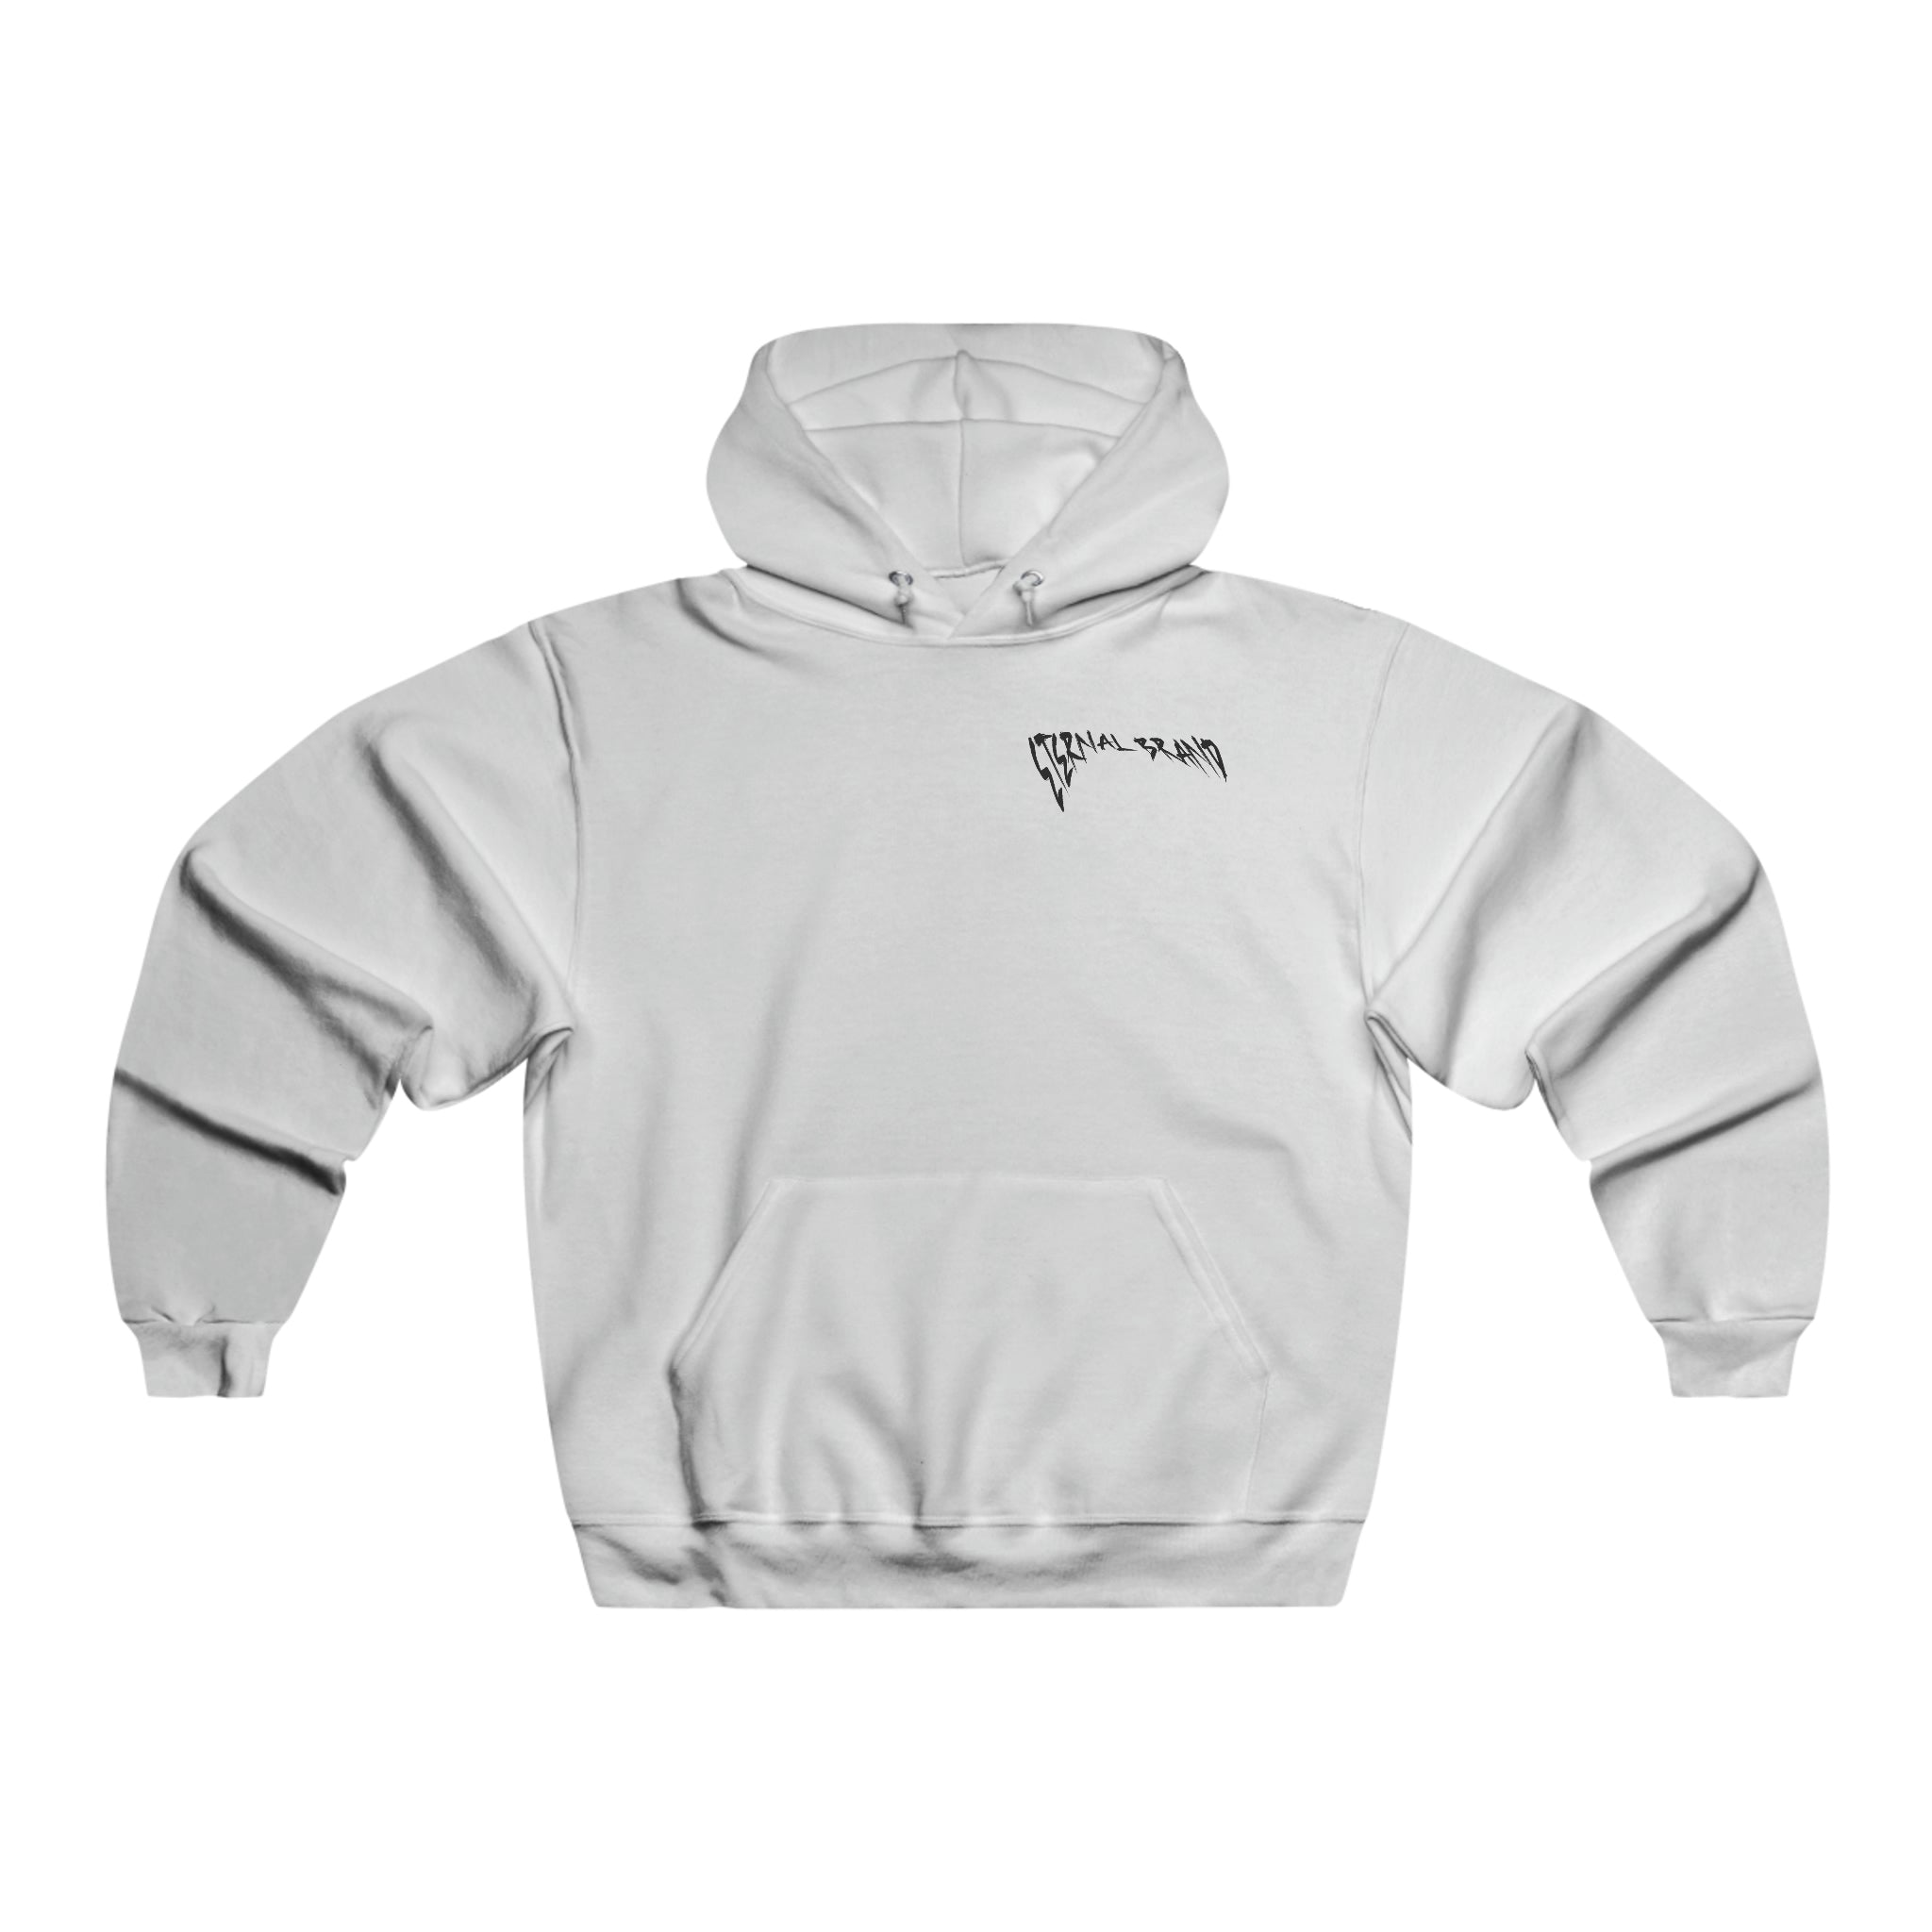 Need Money For Mustang Hoodie